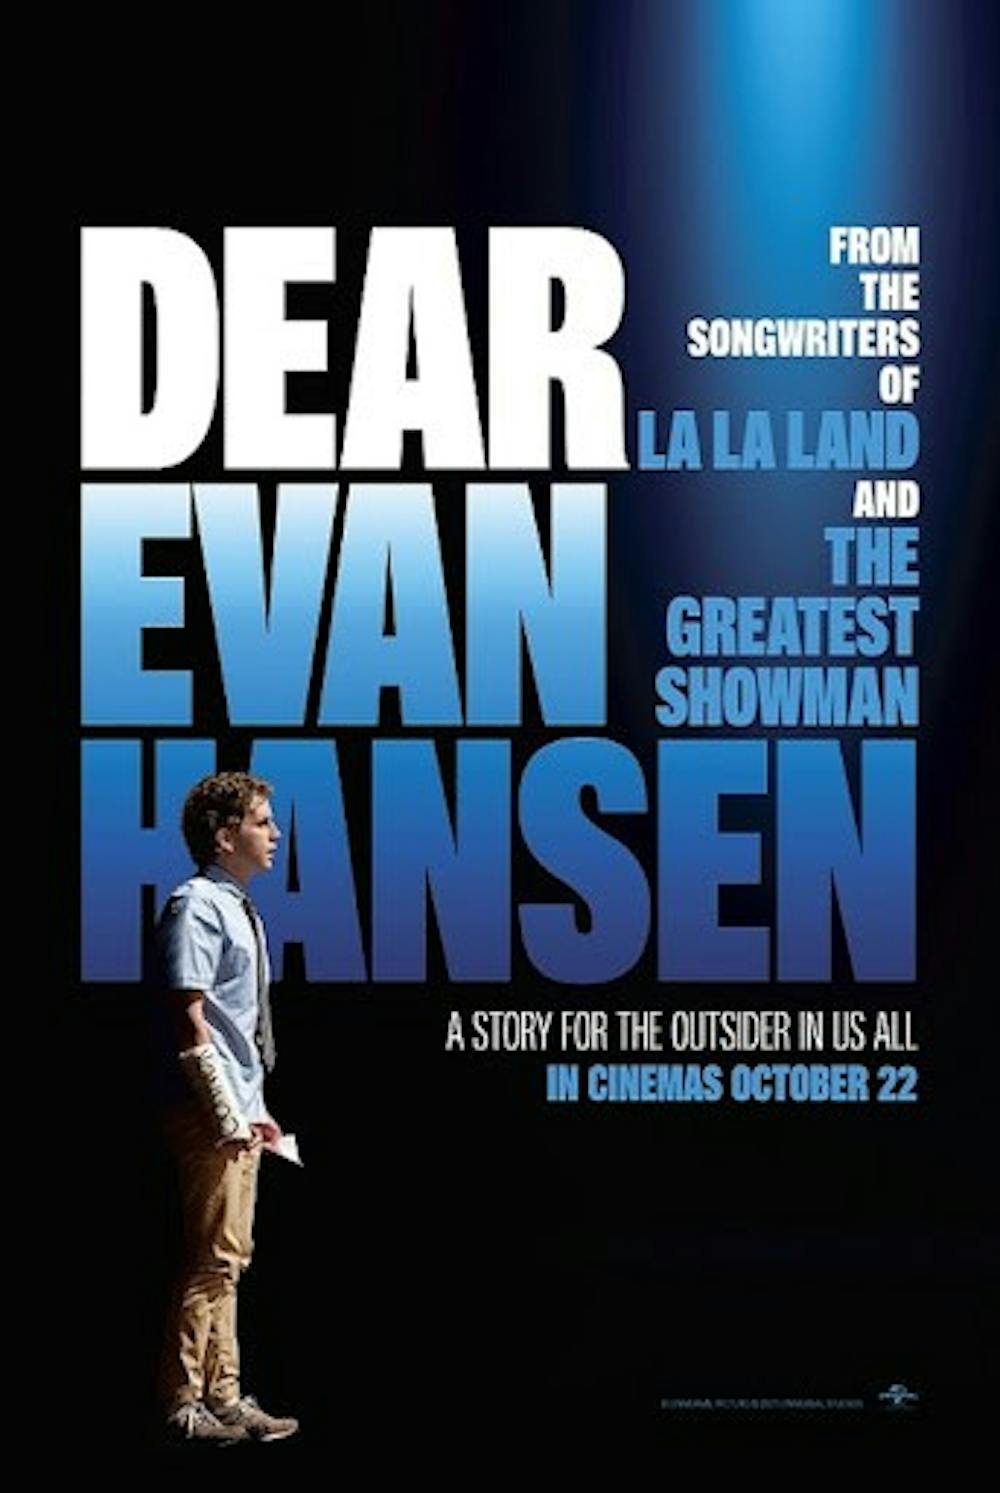 The film adaptation of “Dear Evan Hansen” released in theaters on Friday.